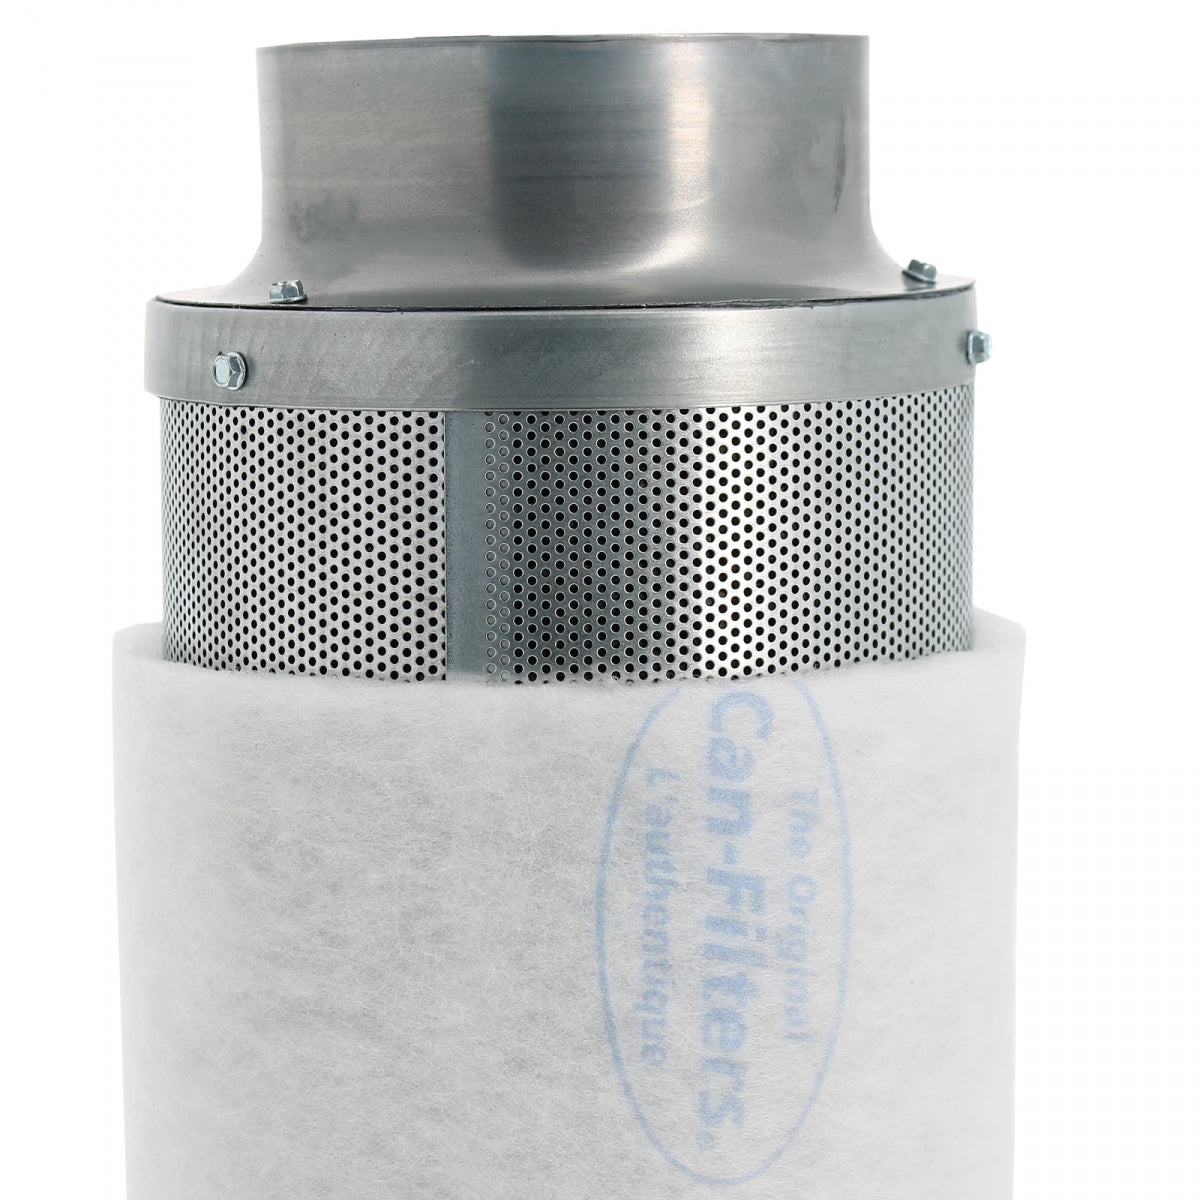 Can-Lite-Filter 600 m3/h – 150 mm